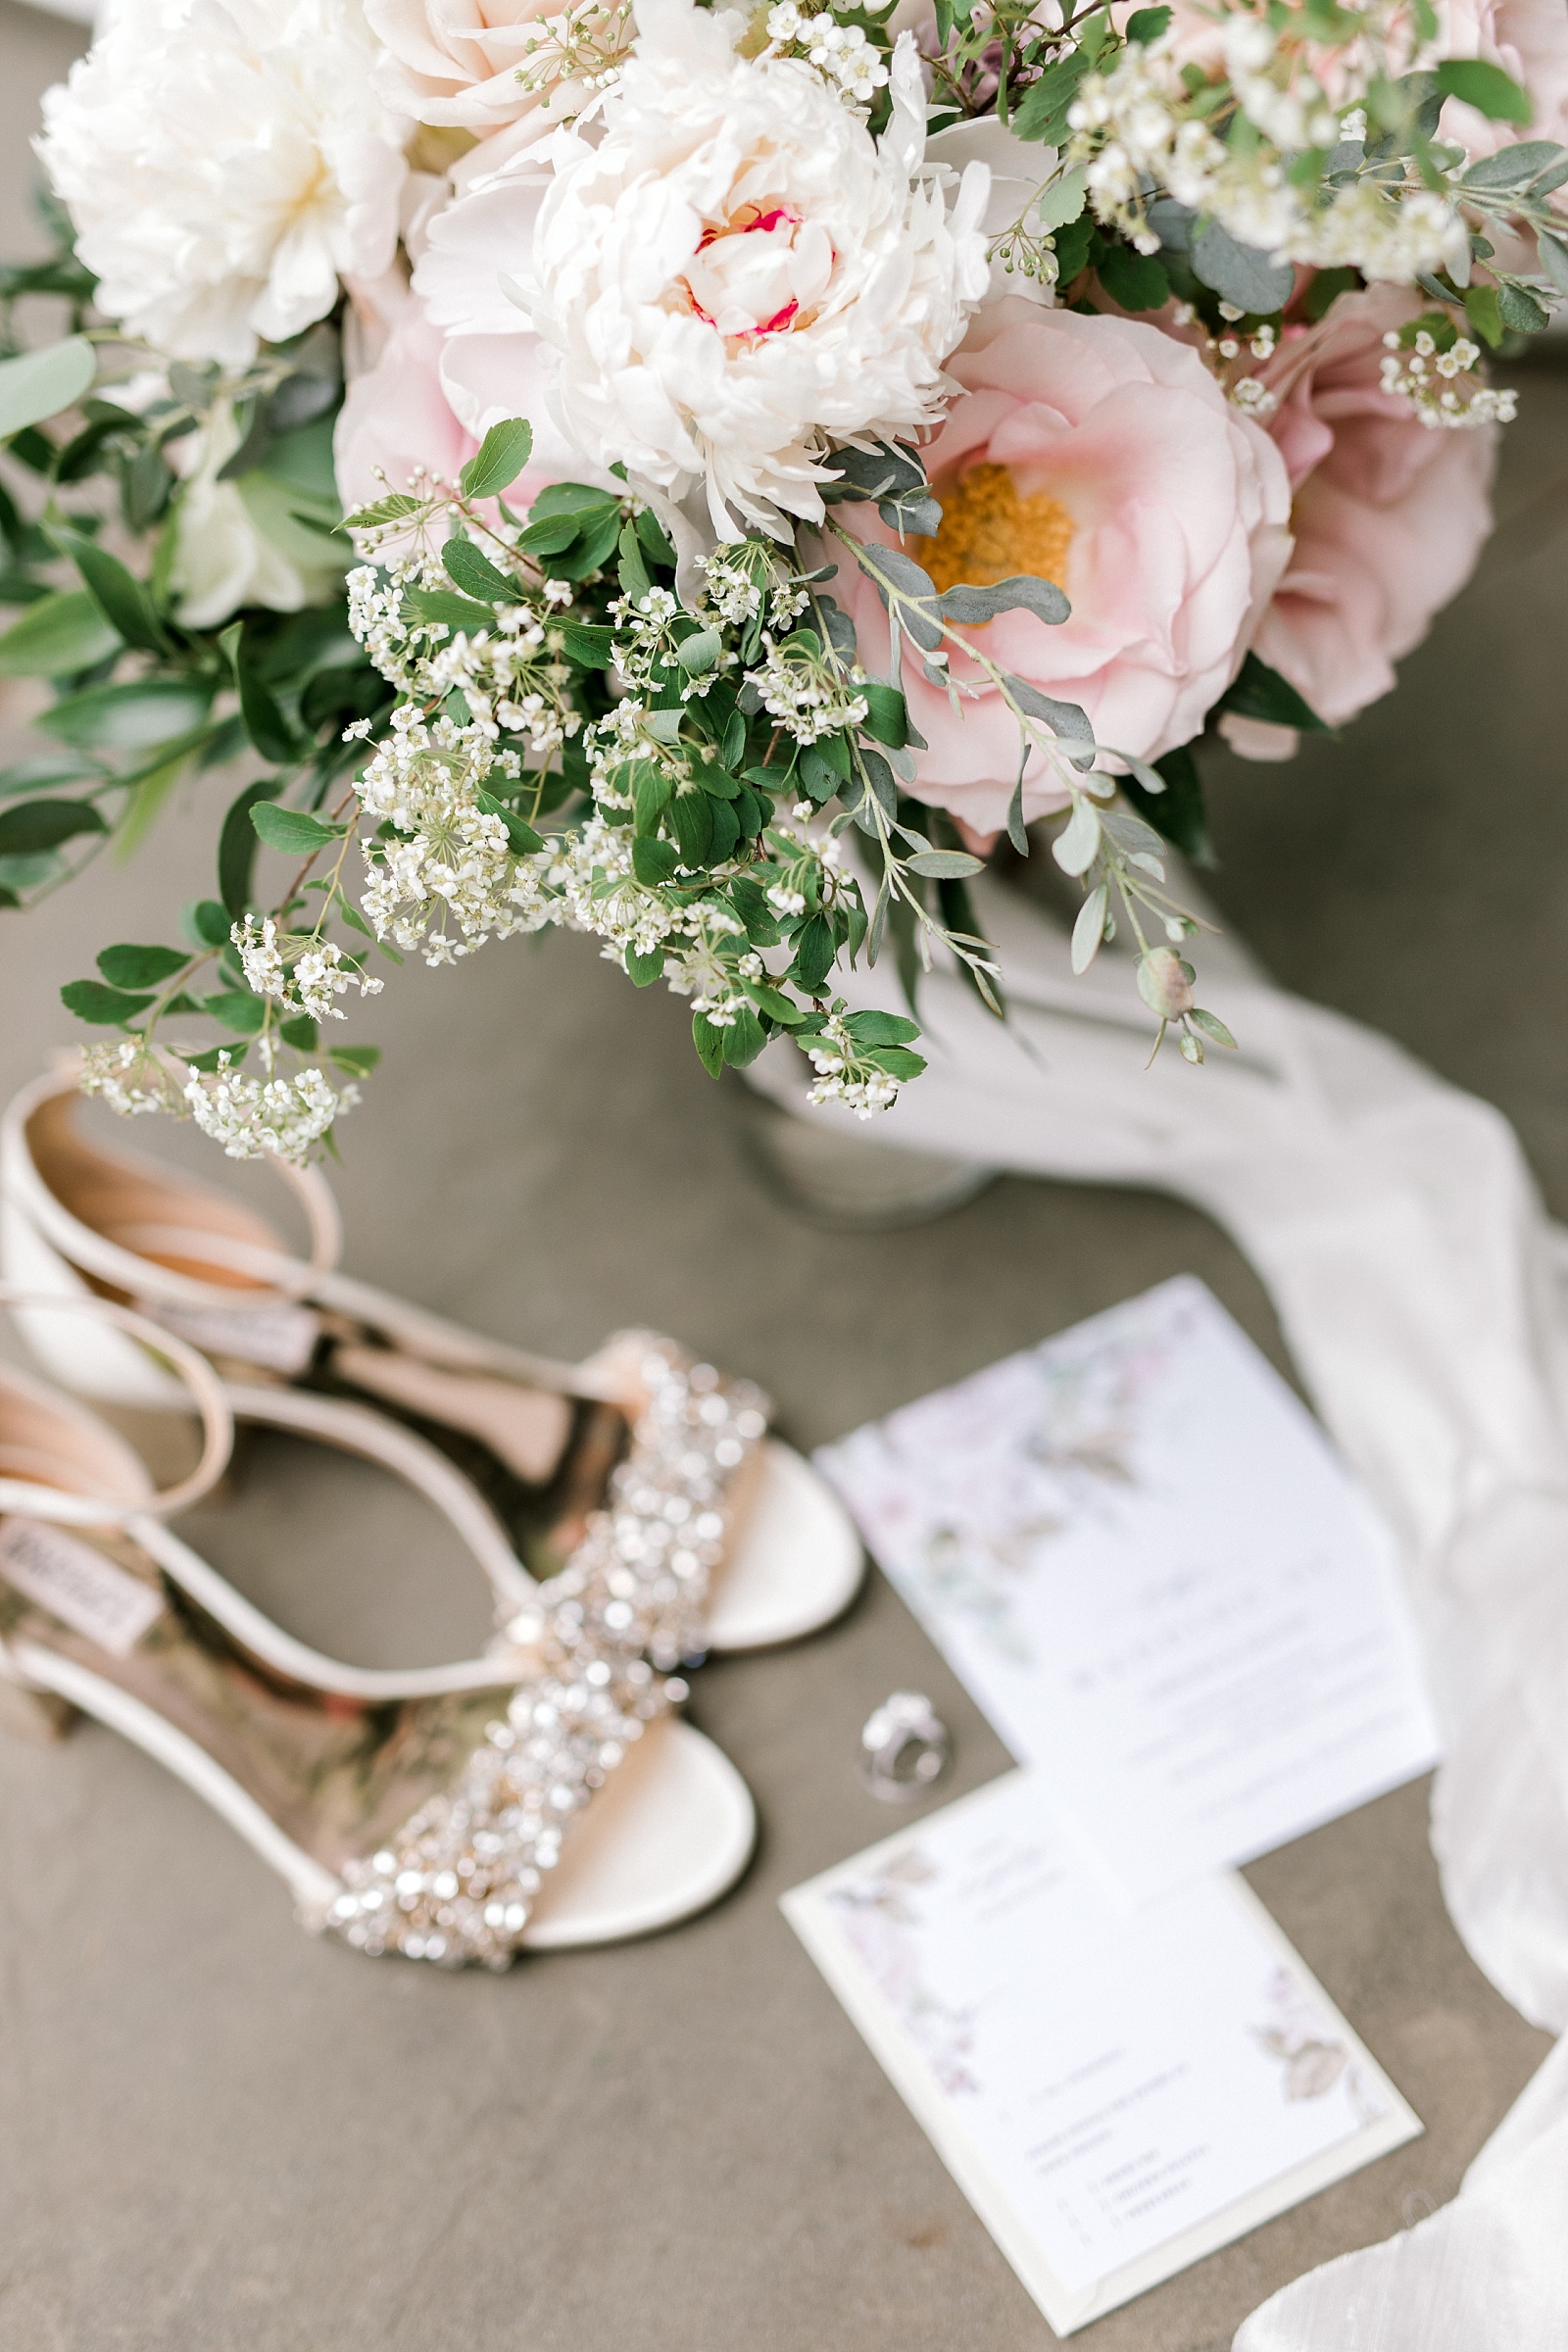 lancaster wedding photographer, drumore estate, bright and airy photography, rebecca shivers photography, filmy photography